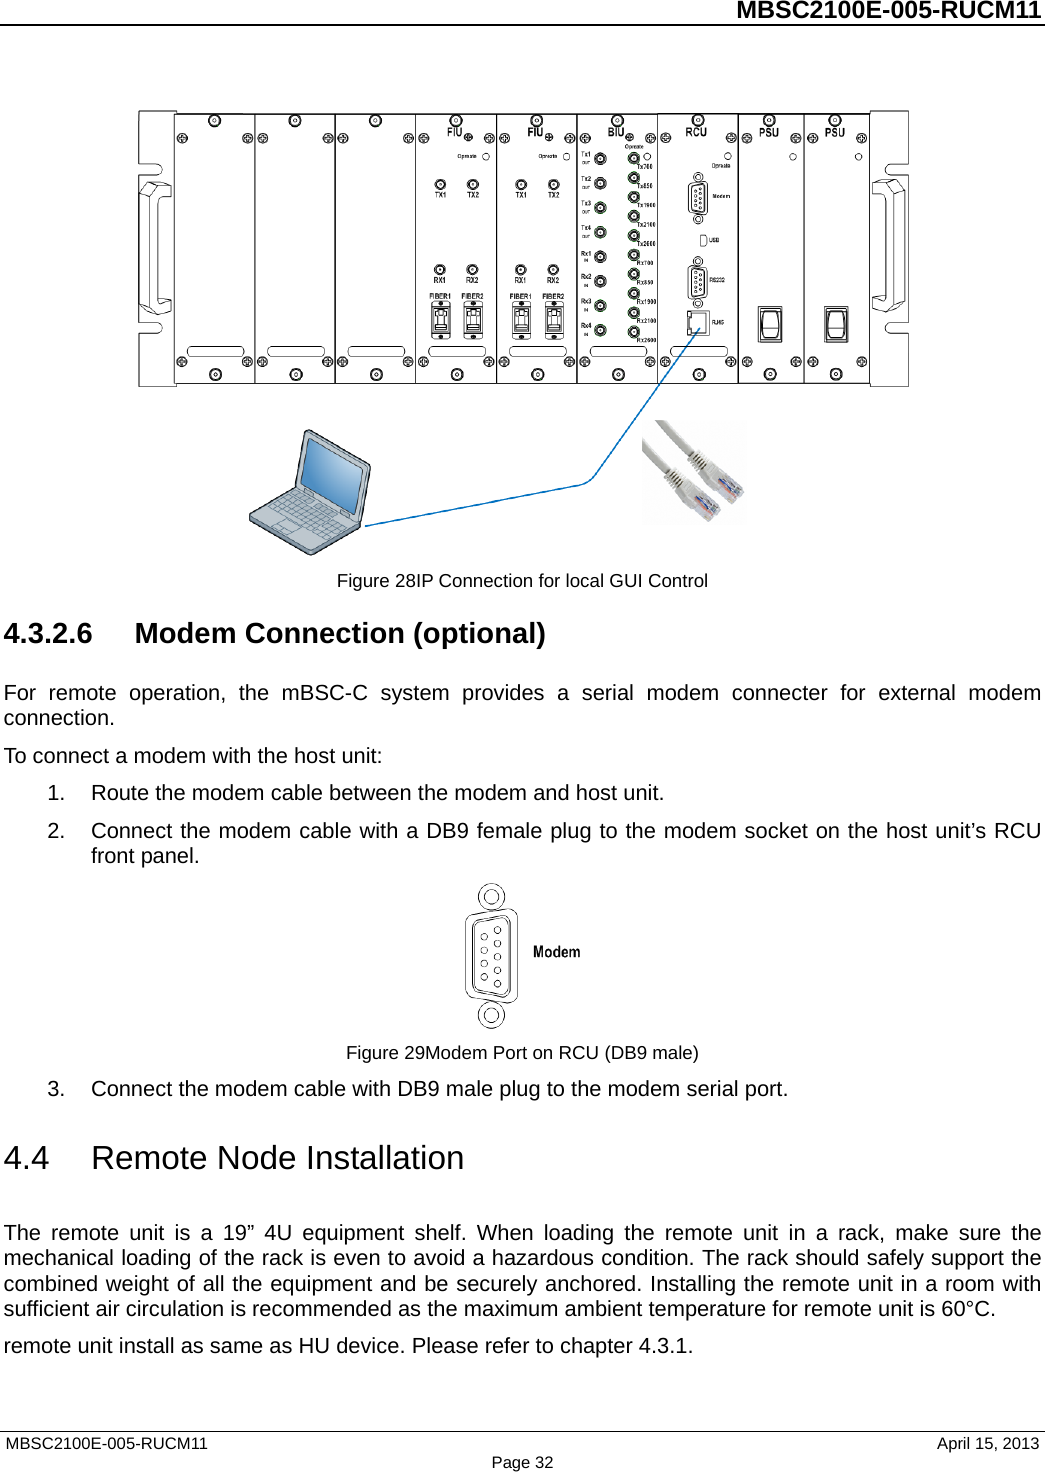          MBSC2100E-005-RUCM11    Figure 28IP Connection for local GUI Control 4.3.2.6 Modem Connection (optional) For remote operation, the mBSC-C system provides a serial modem connecter for external modem connection. To connect a modem with the host unit: 1. Route the modem cable between the modem and host unit. 2. Connect the modem cable with a DB9 female plug to the modem socket on the host unit’s RCU front panel.  Figure 29Modem Port on RCU (DB9 male) 3. Connect the modem cable with DB9 male plug to the modem serial port. 4.4 Remote Node Installation The remote unit is a 19” 4U equipment shelf. When loading the remote unit in a rack, make sure the mechanical loading of the rack is even to avoid a hazardous condition. The rack should safely support the combined weight of all the equipment and be securely anchored. Installing the remote unit in a room with sufficient air circulation is recommended as the maximum ambient temperature for remote unit is 60°C.   remote unit install as same as HU device. Please refer to chapter 4.3.1.    MBSC2100E-005-RUCM11                                April 15, 2013 Page 32 